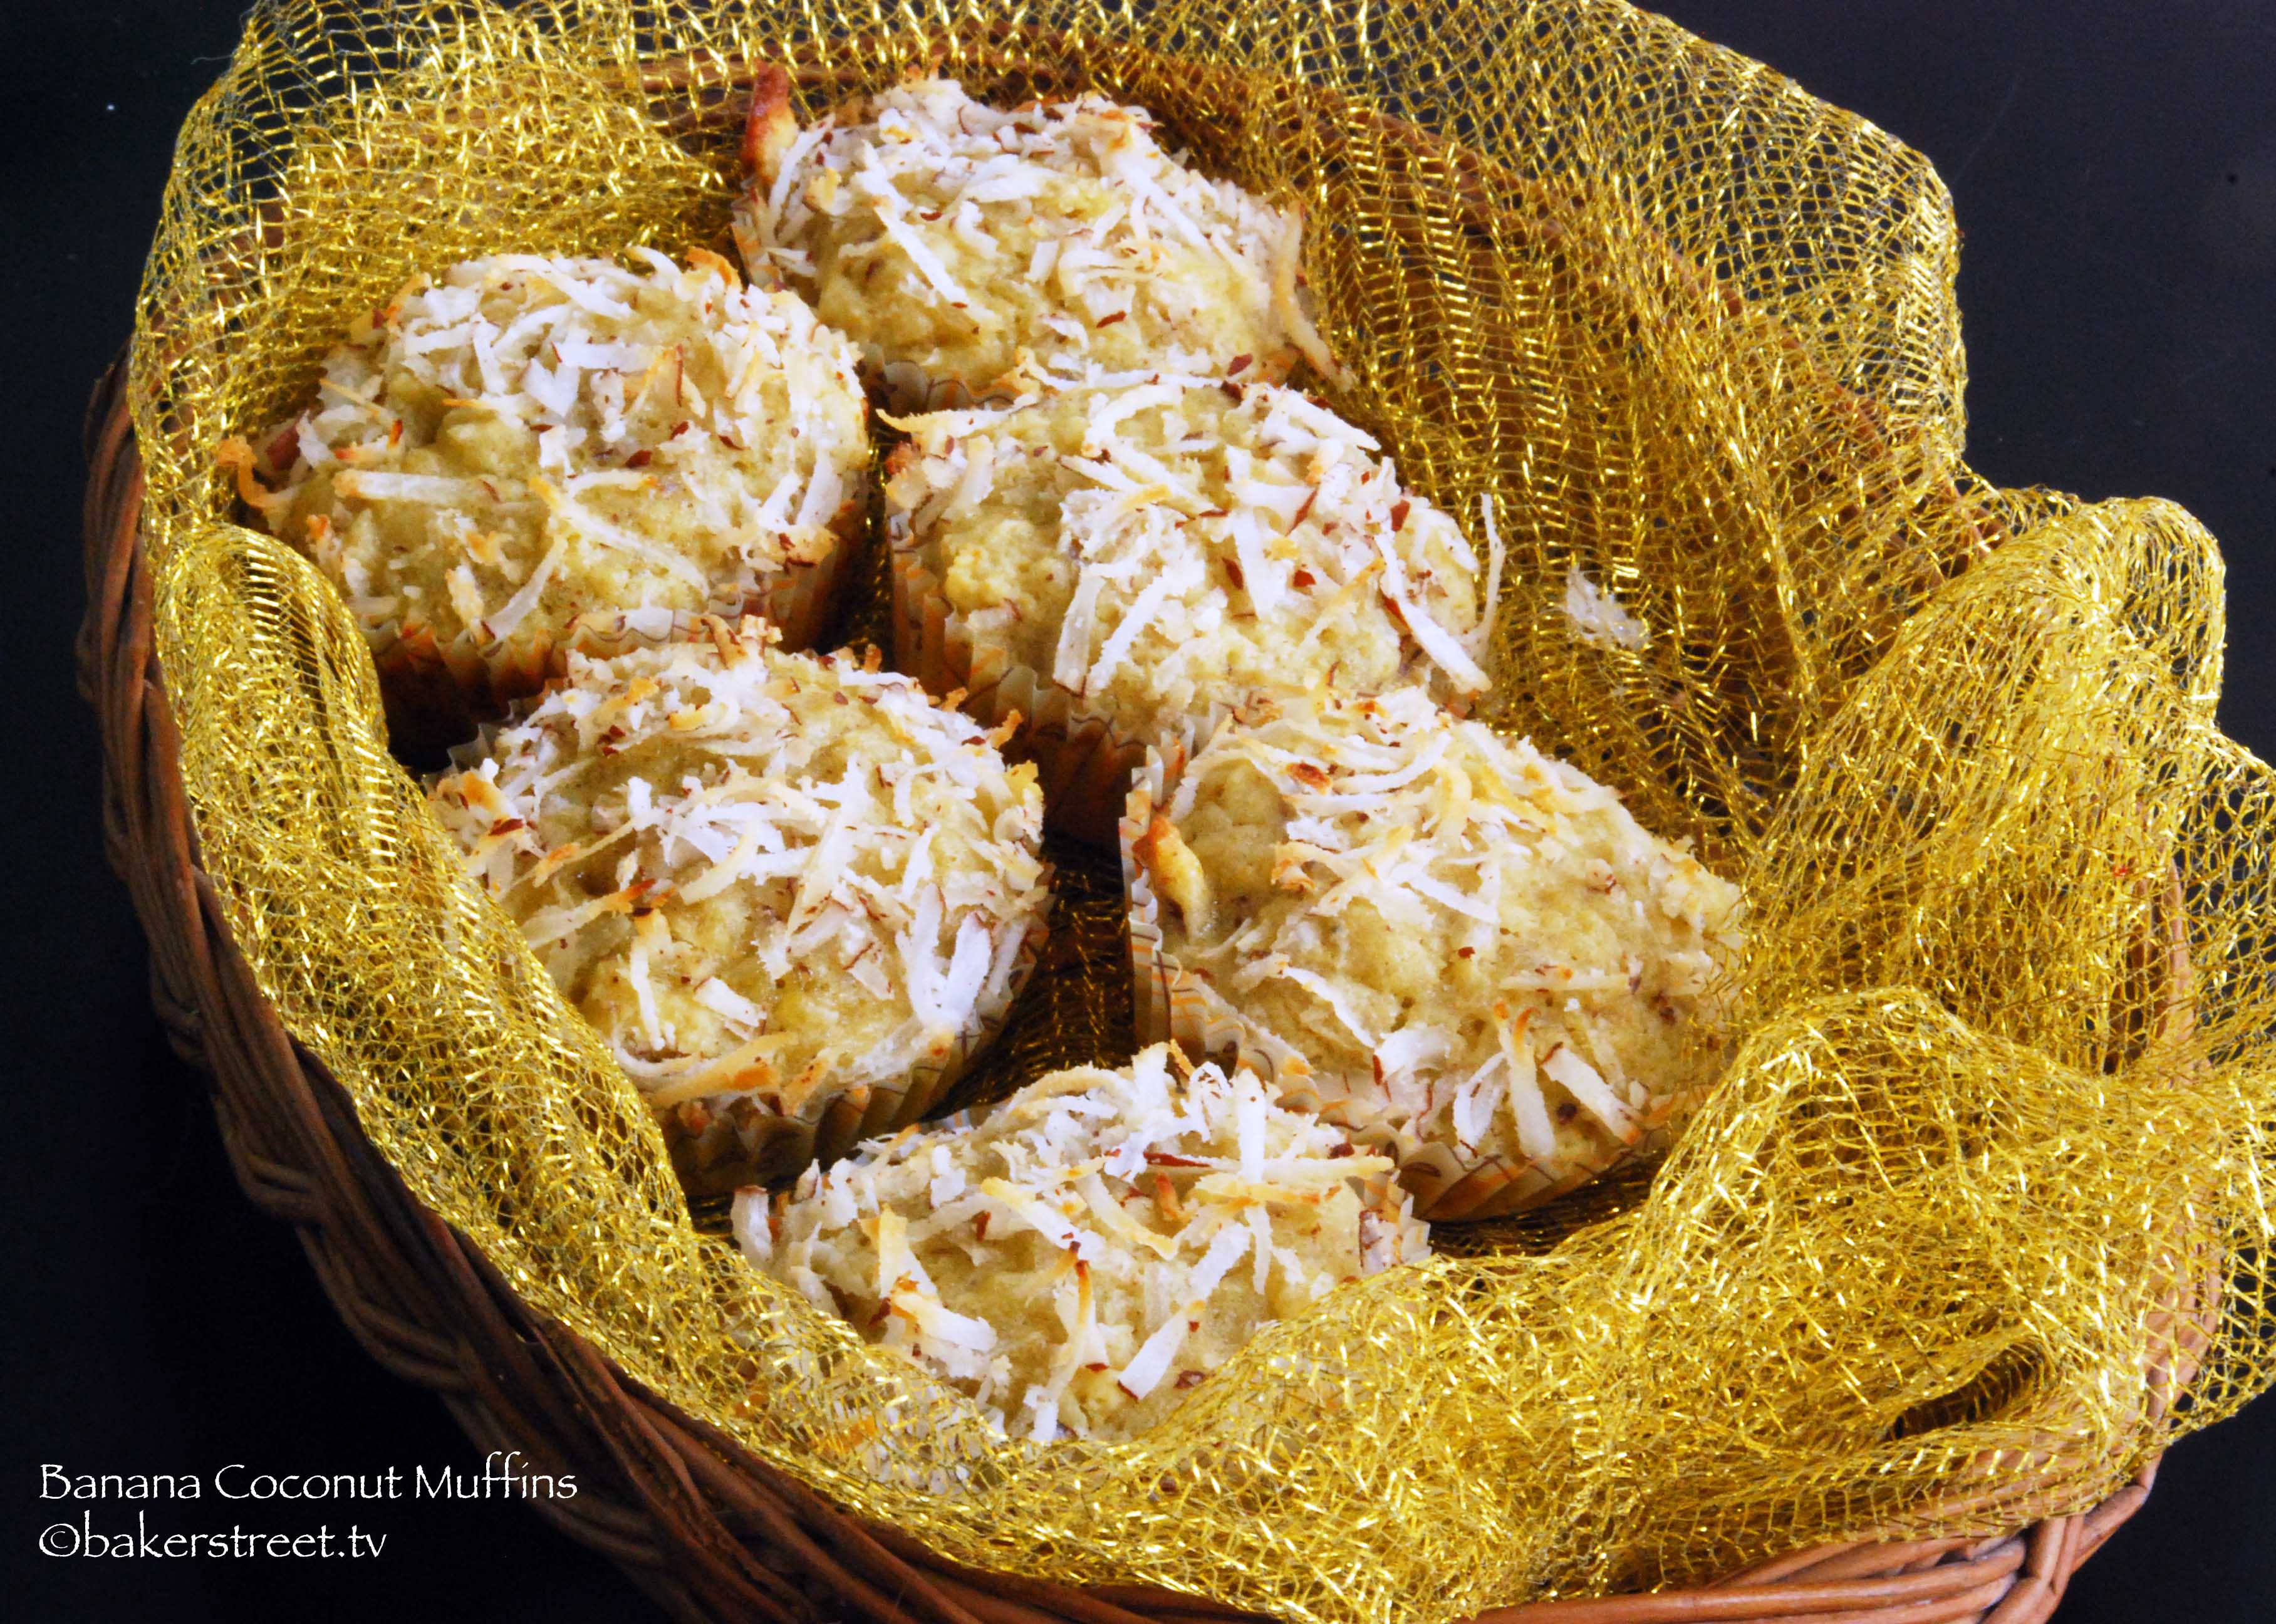 Banana Coconut Muffins | March 12, 2012